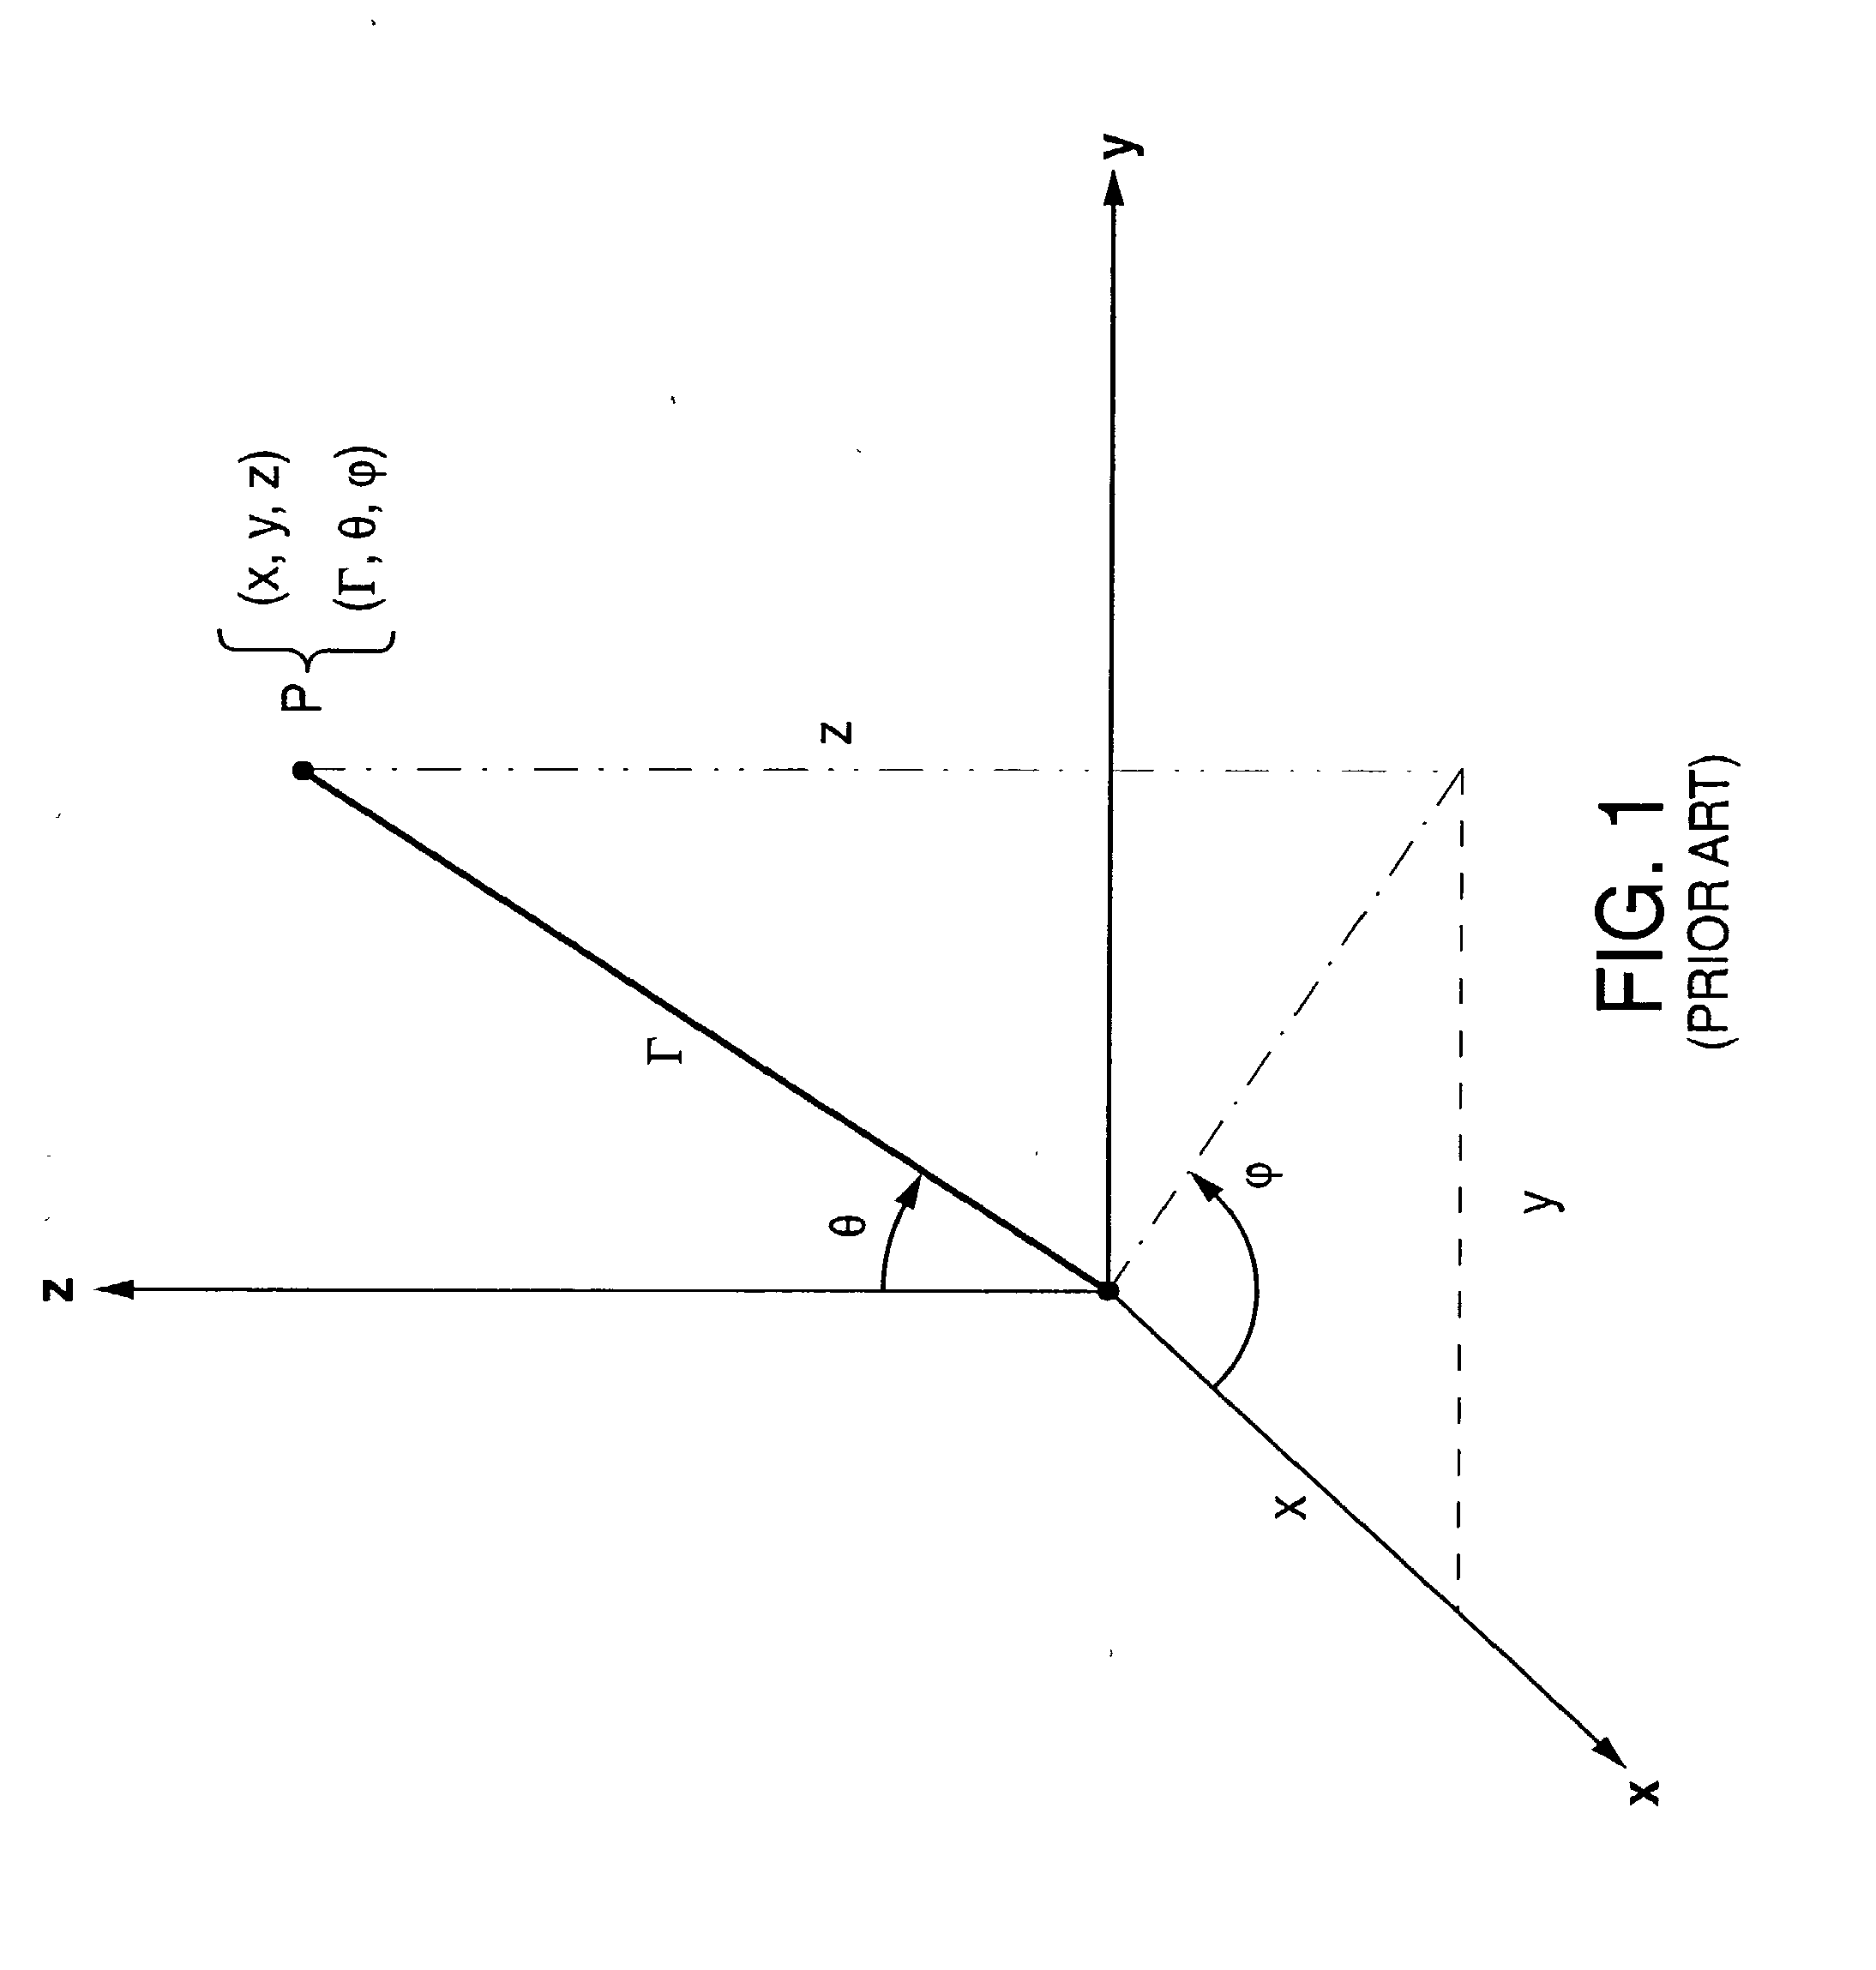 Method and System for Navigating a Catheter Probe in the Presence of Field-Influencing Objects